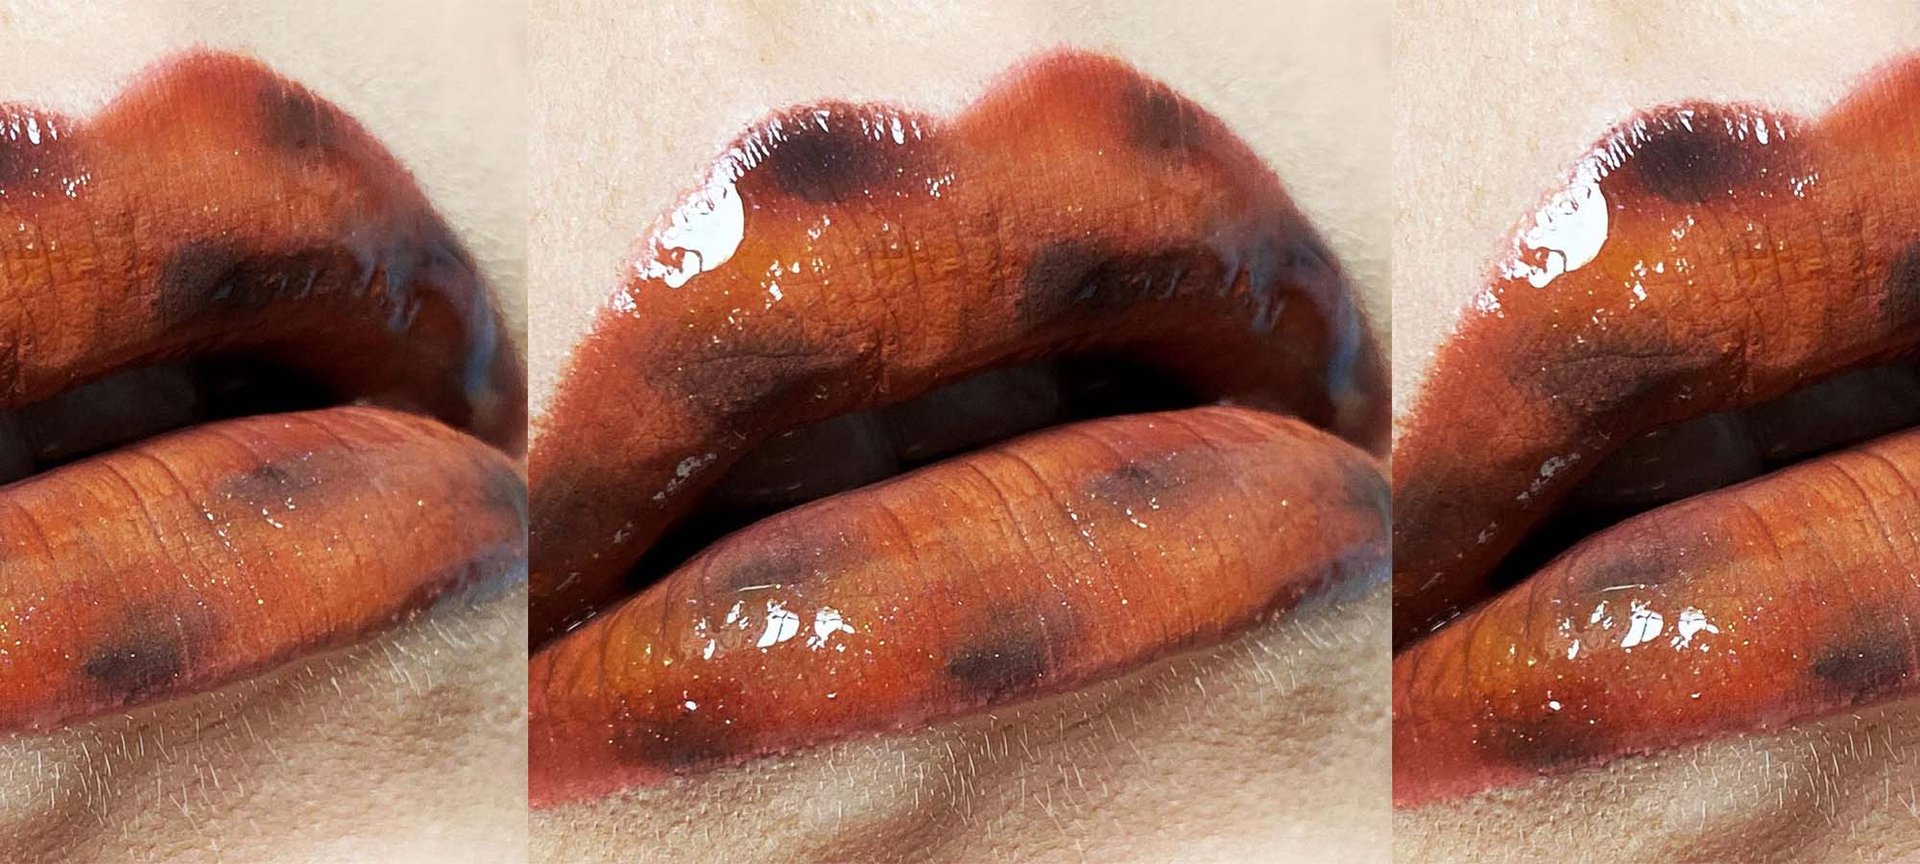 Halloween Makeup Ideas For Your Lips CMS Slide05 Bmag